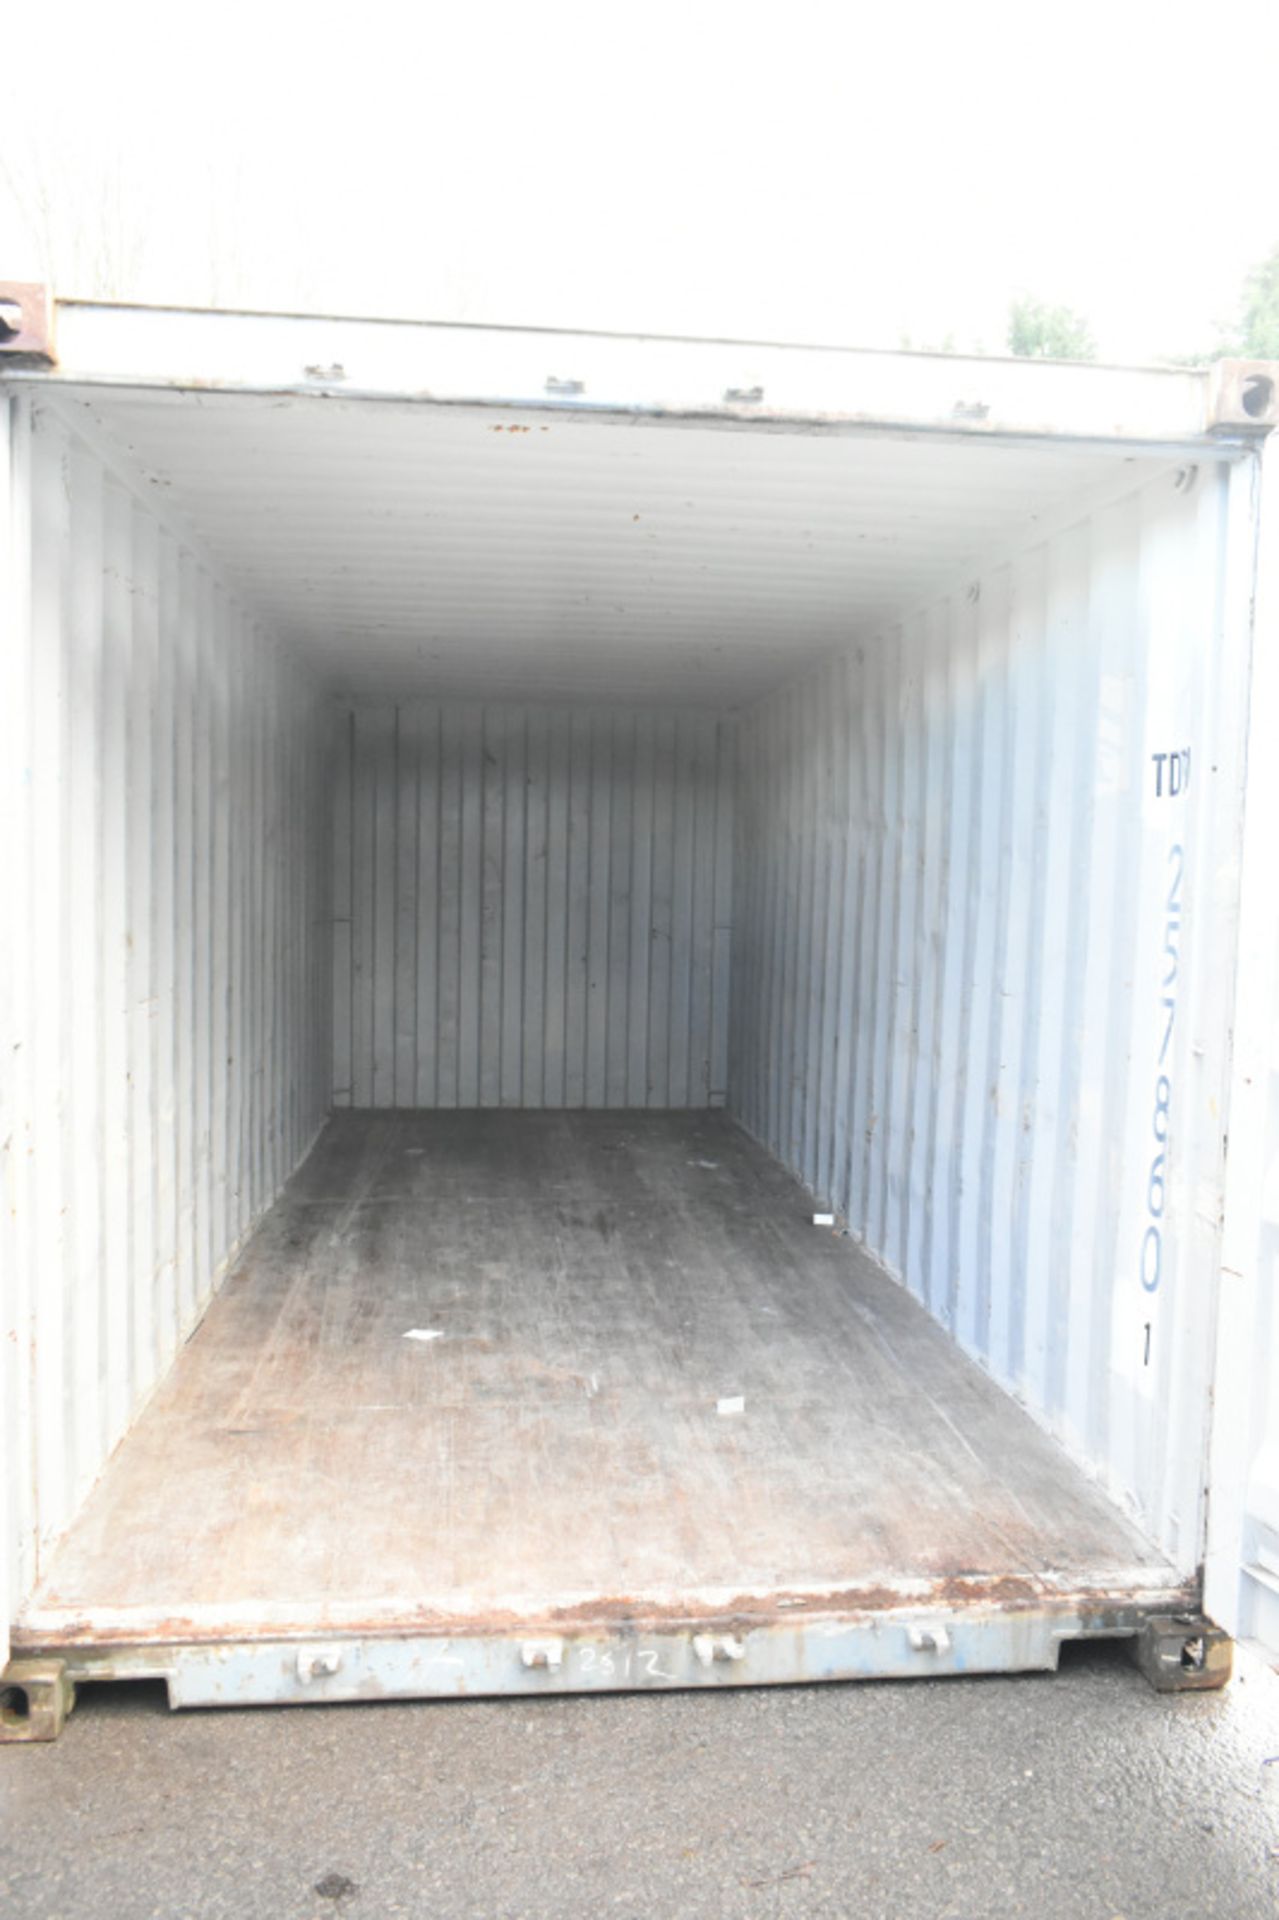 20ft ISO container - L 6.5M x W 2.44M x H 2.6M - Image 5 of 6